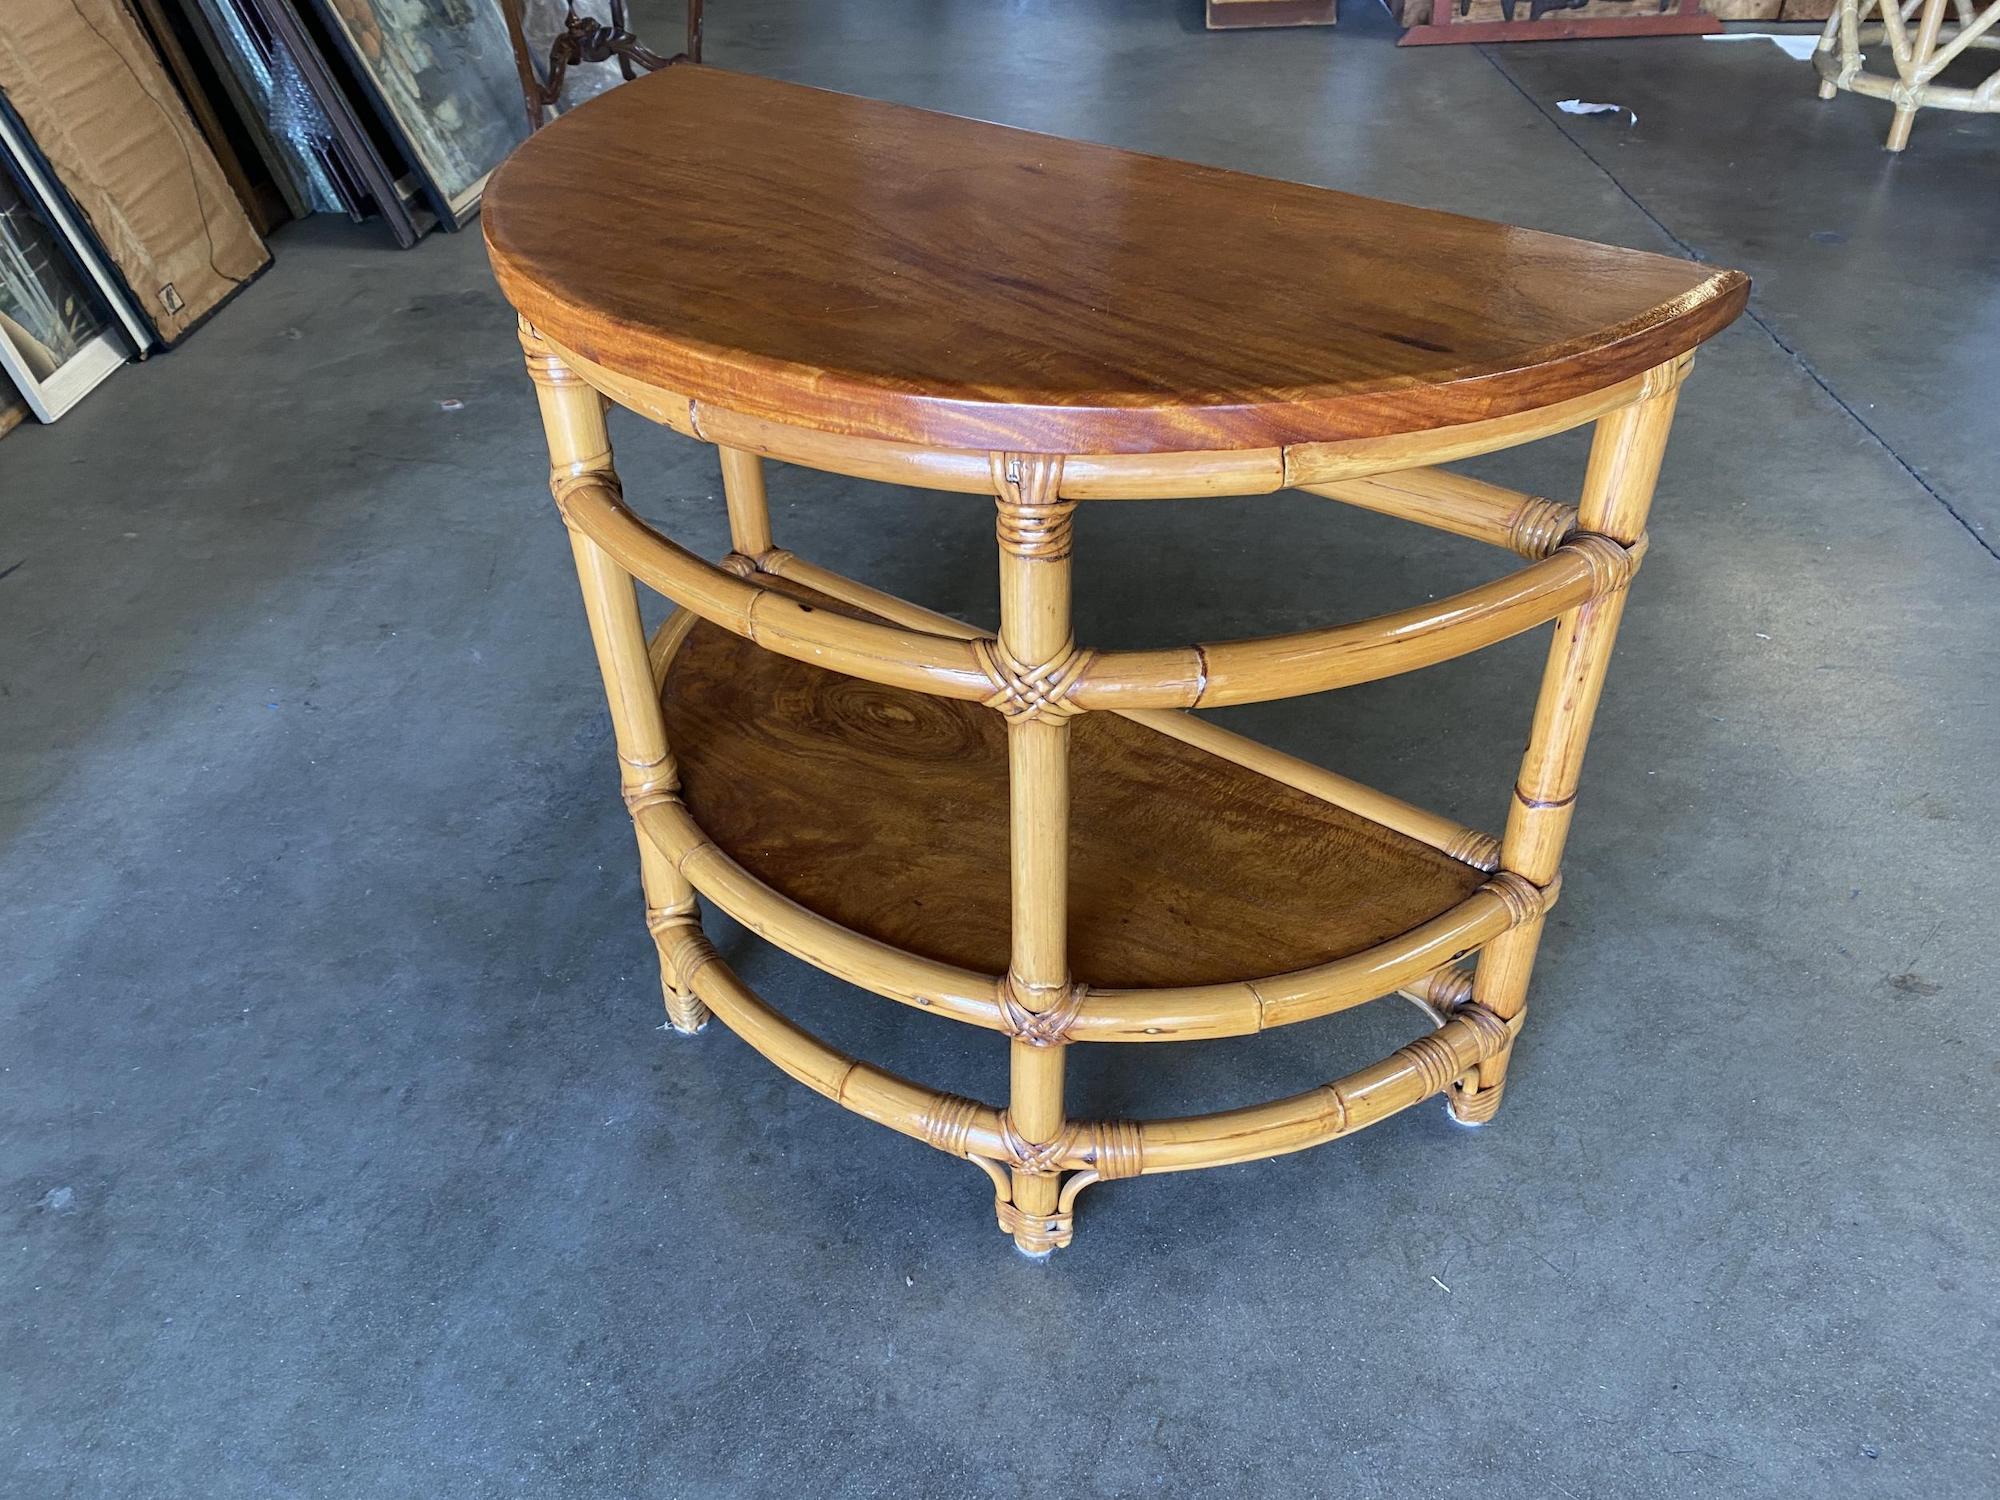 Mid-20th Century Restored Half Round Rattan Side Table with Ladder Sides & Mahogany Top